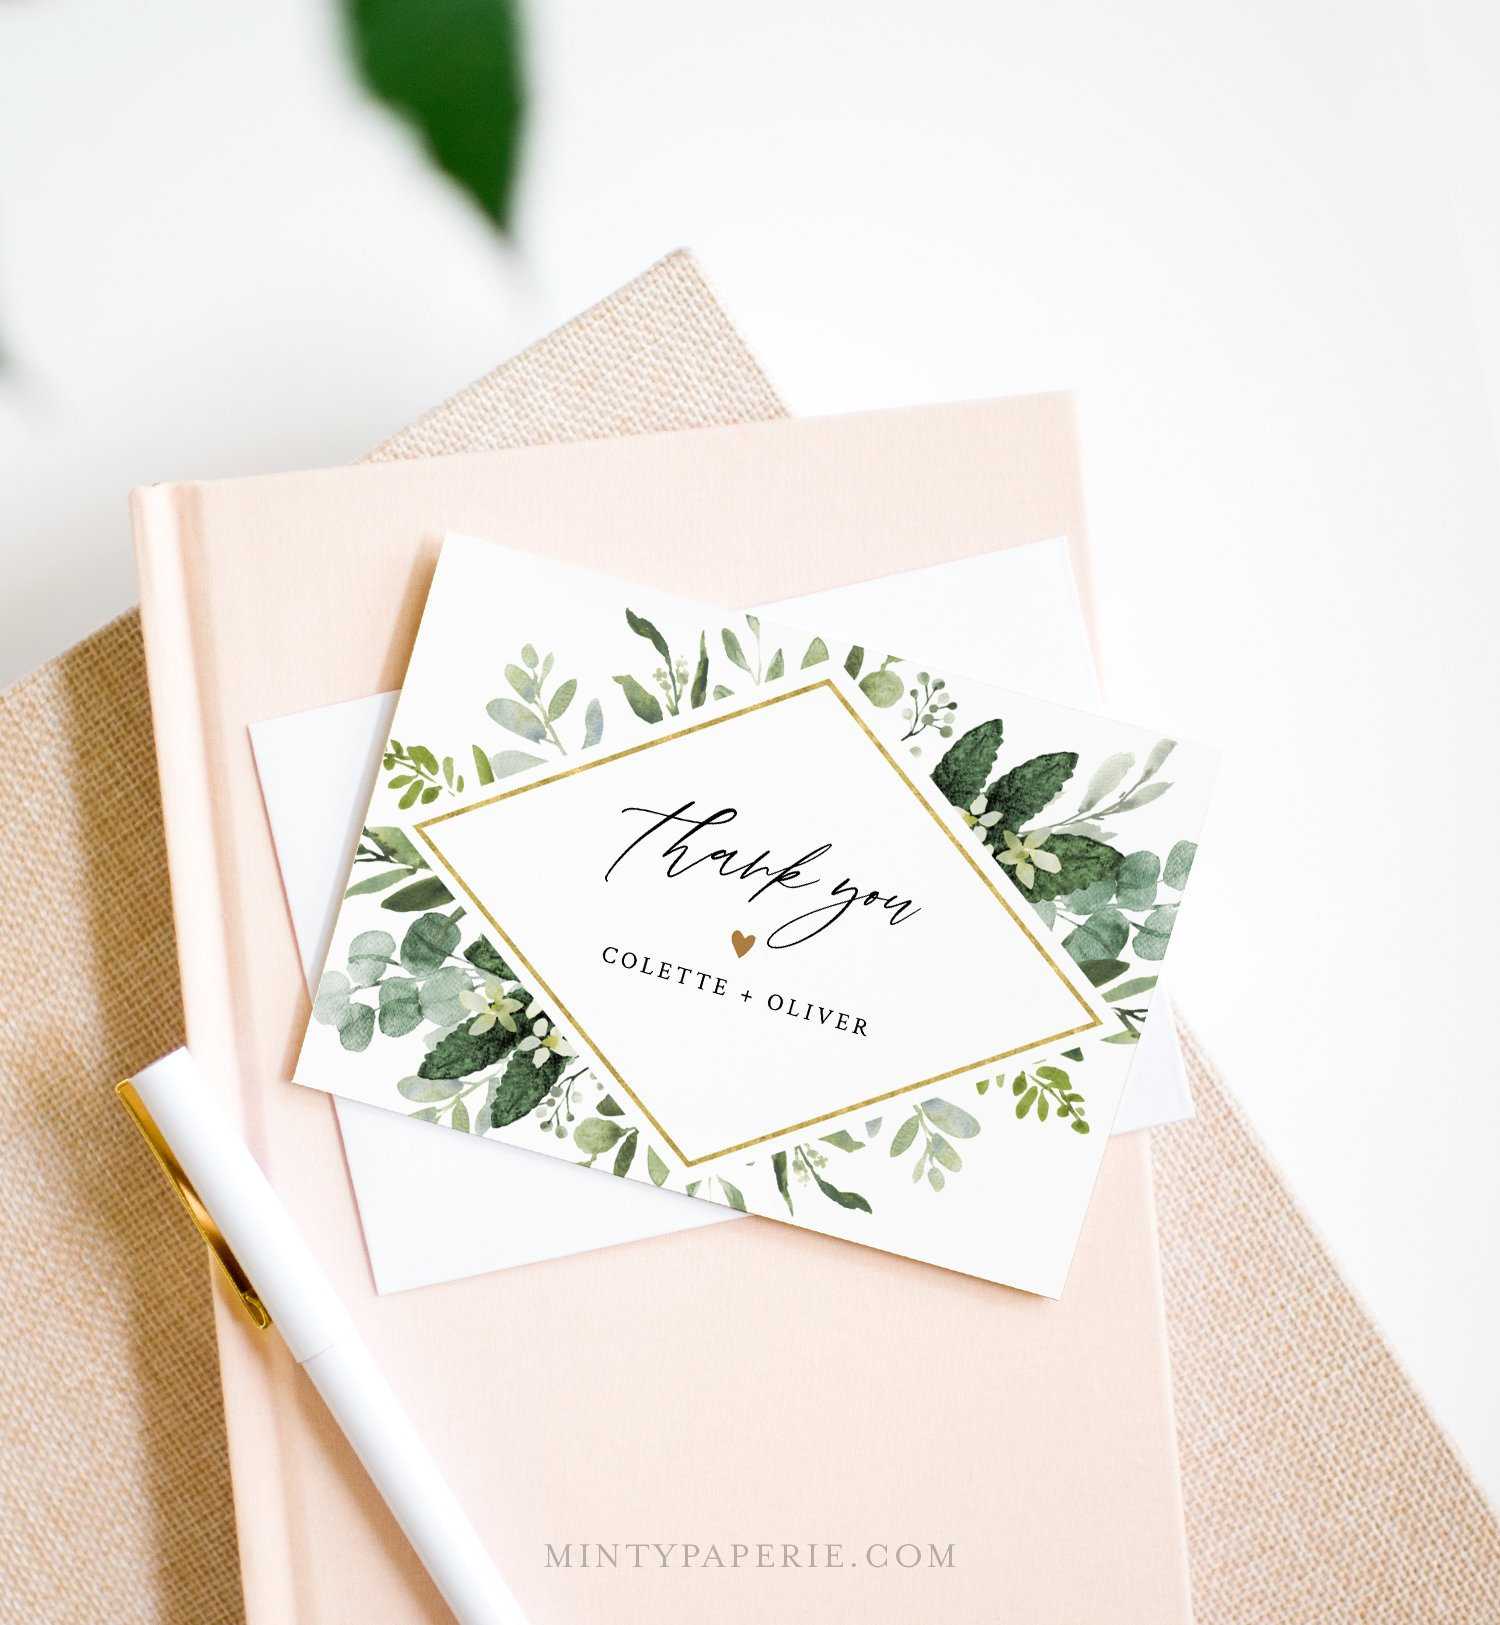 Thank You Note Card Template, Printable Greenery & Gold Wedding / Bridal  Shower Folded Card, Instant Download, Editable Text #082 124Tyc With Thank You Note Card Template